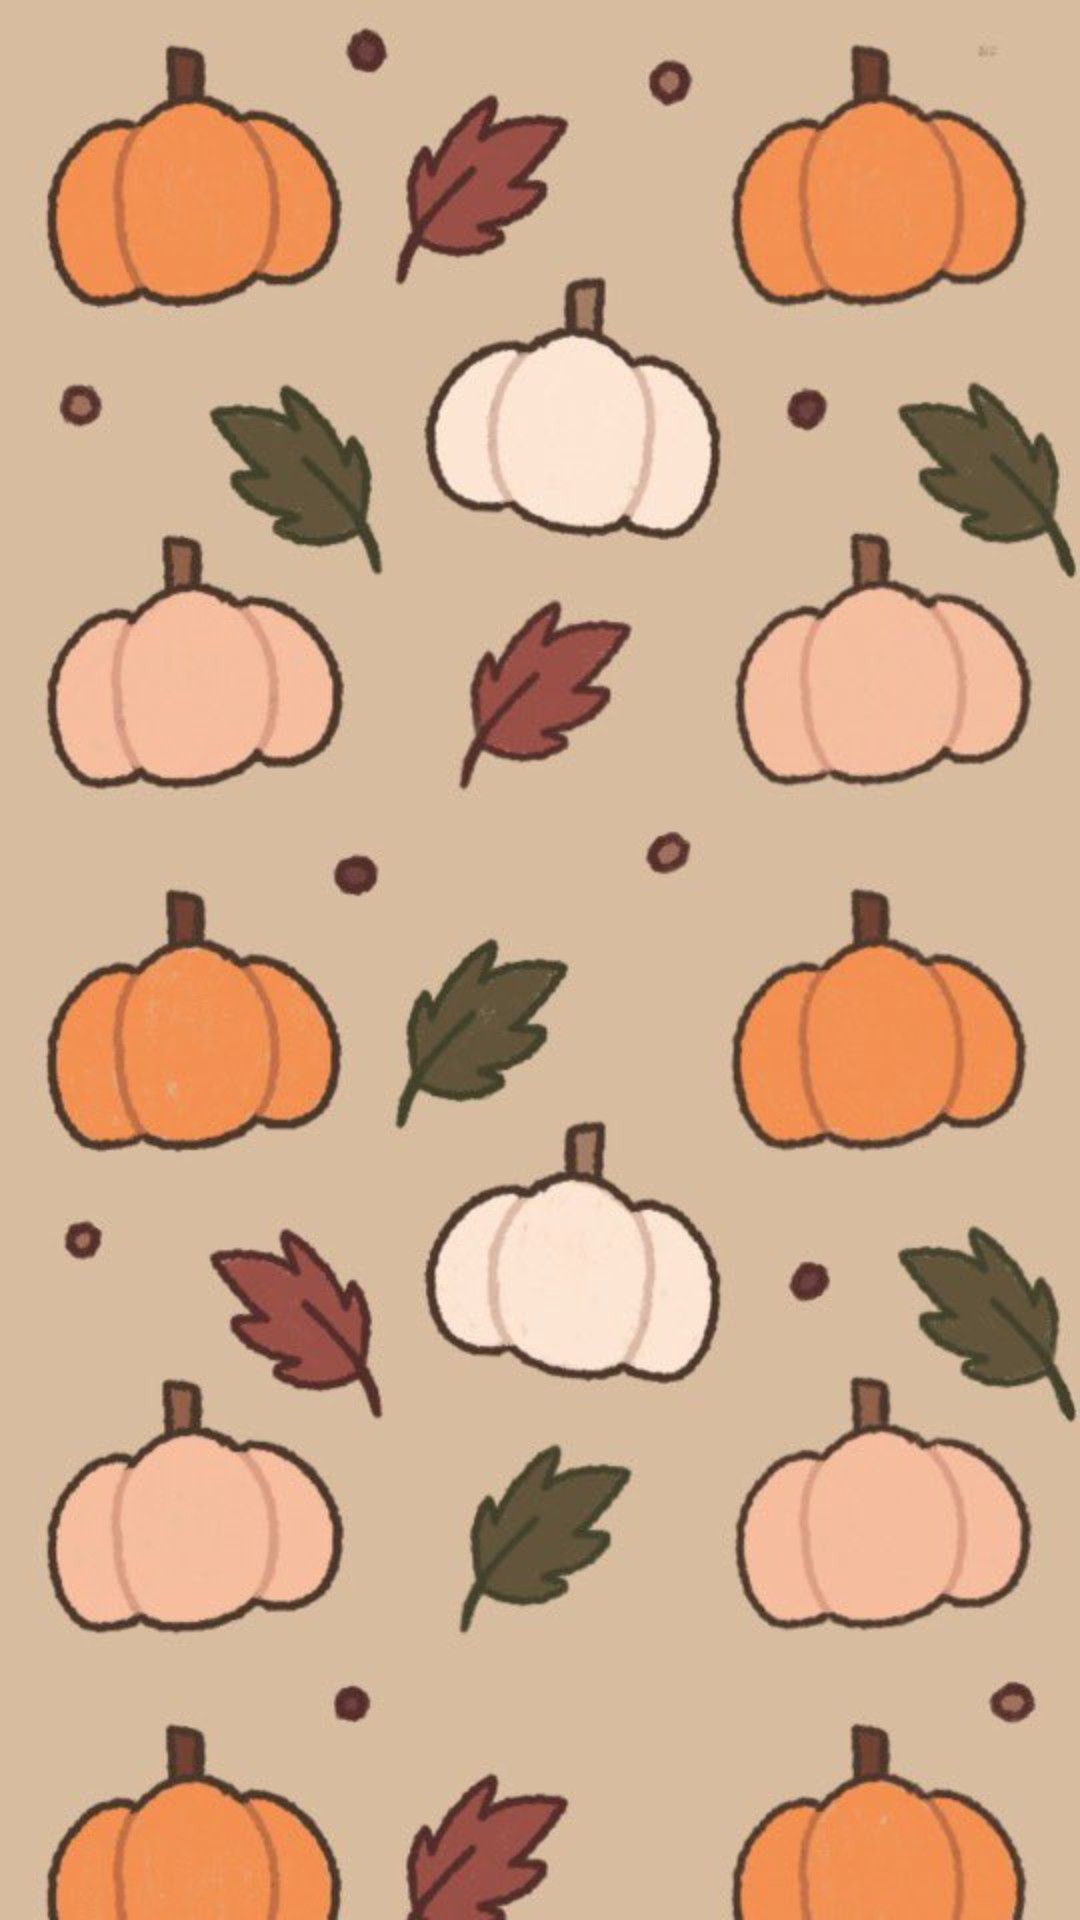 A pattern of pumpkins and leaves - Cute Halloween, spooky